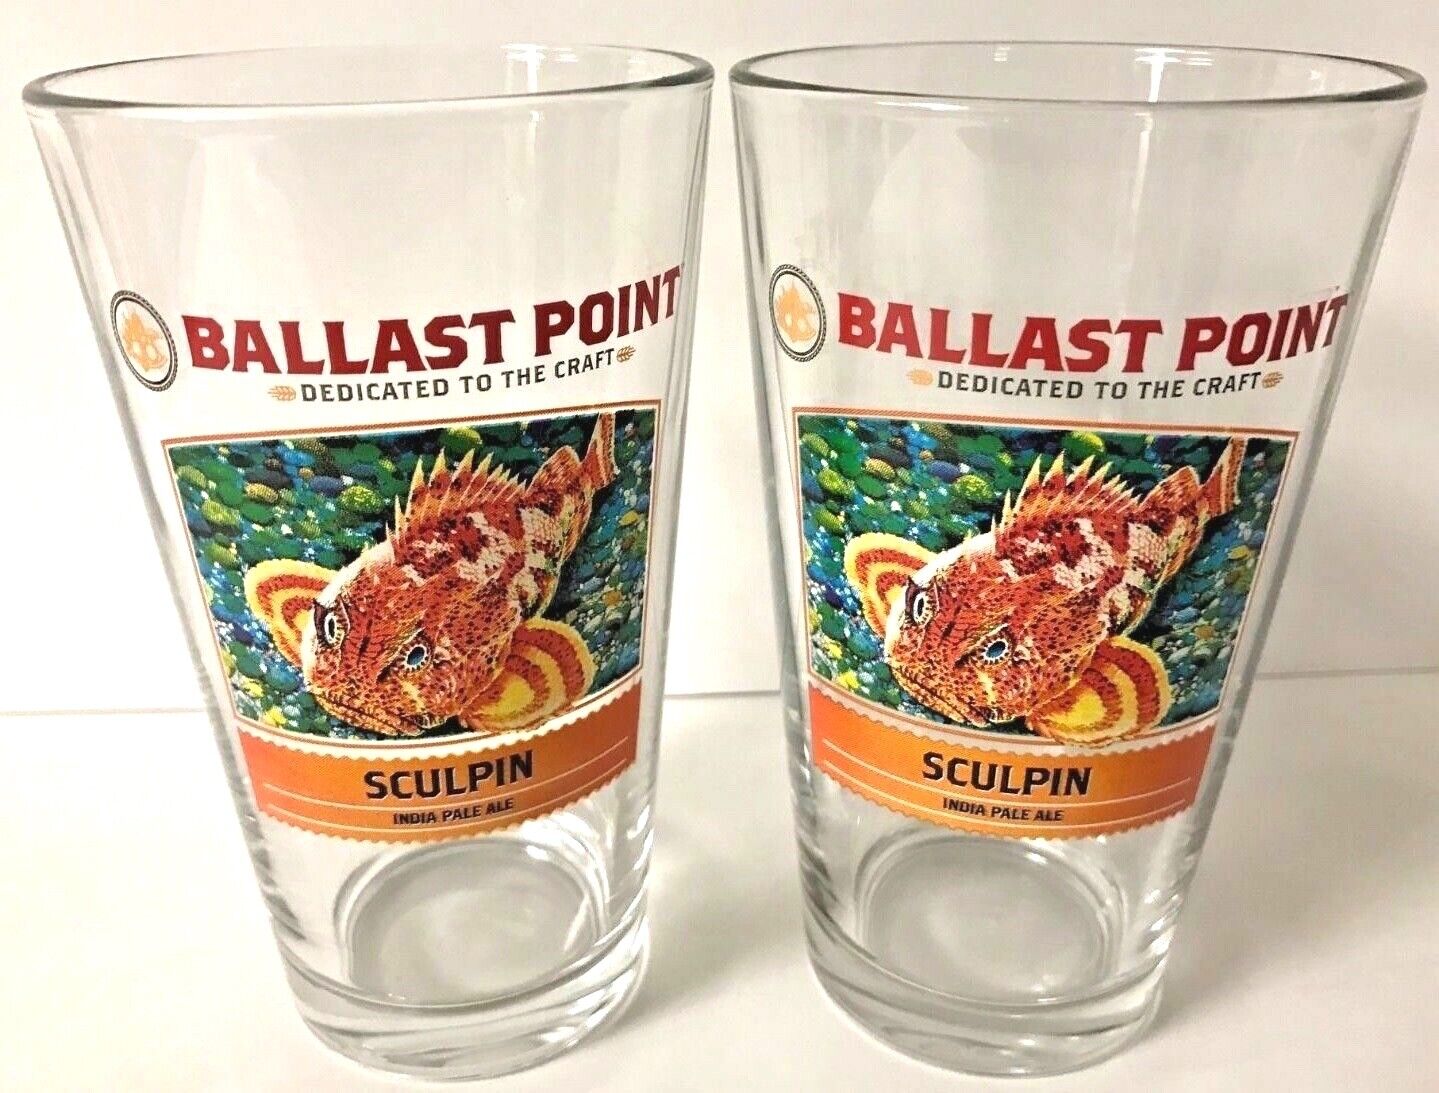 Ballast Point Sculpin IPA Beer Pint Glass 16 oz - Two (2) Glasses - New & F/S